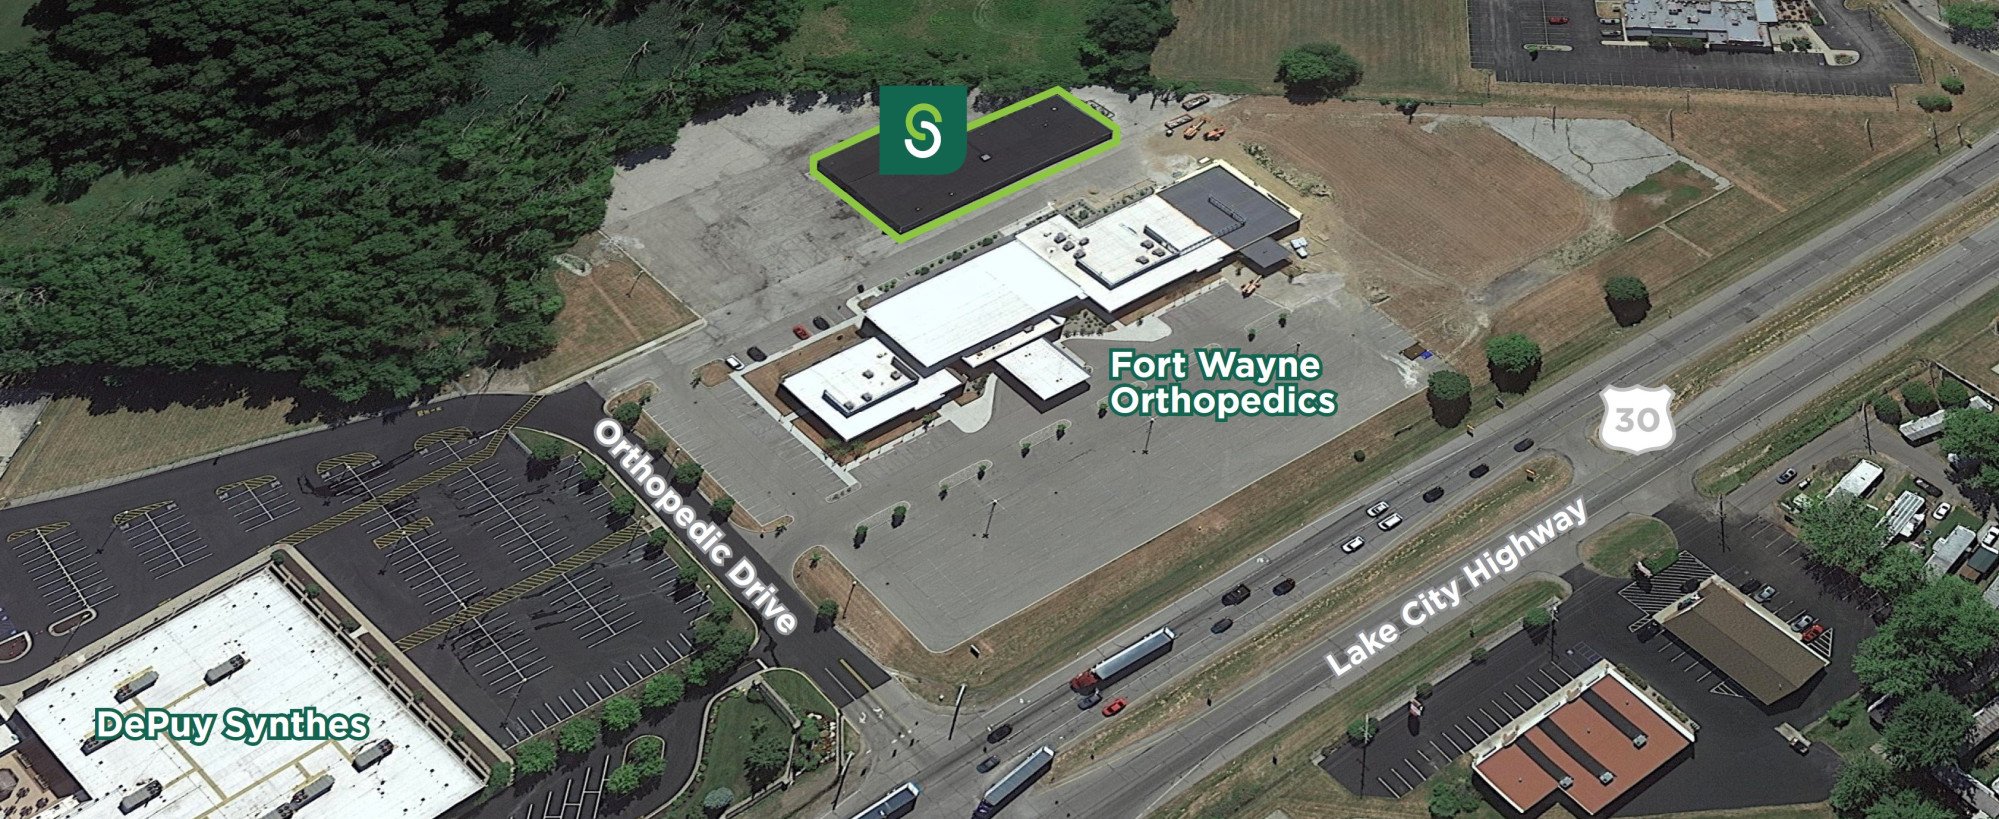 Sturges Property Group - Lake City Office Complex, 715 Orthopedic Dr, Warsaw, IN 46582